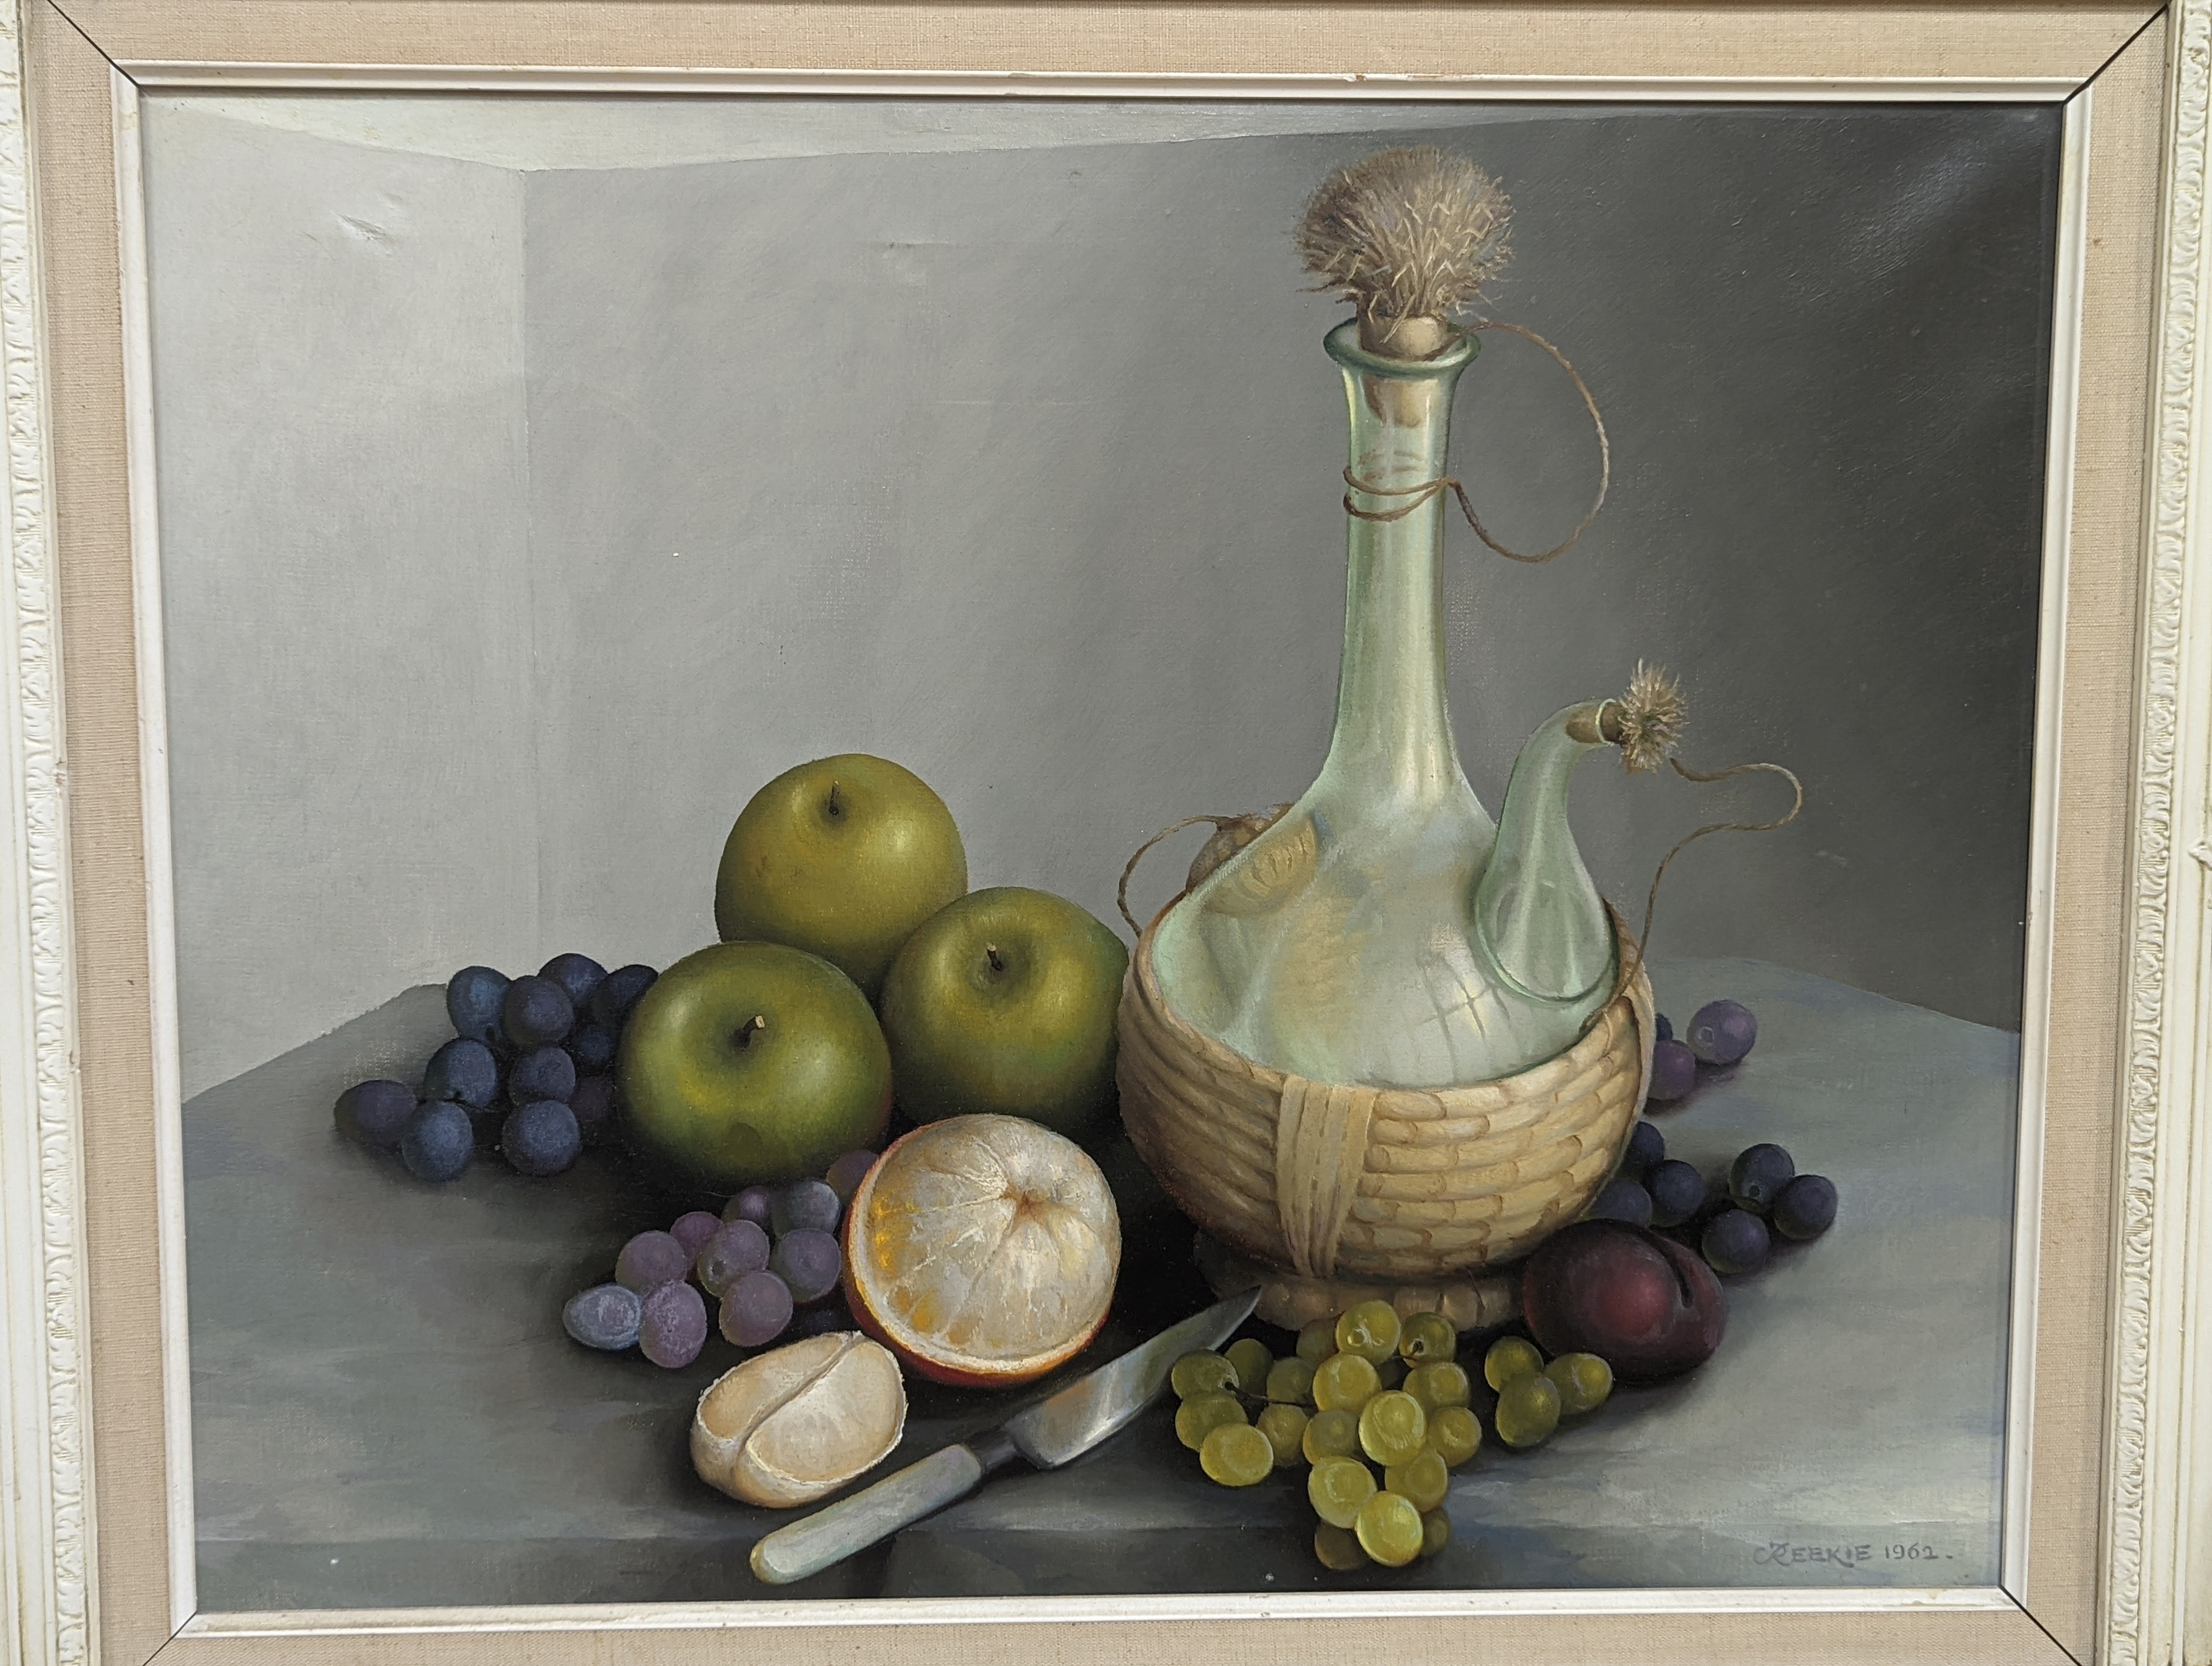 William Maxwell Reekie (1869-1948), three oils on canvas, Still lifes of flowers and fruit, signed and dated c.1960, largest 45 x 55cm